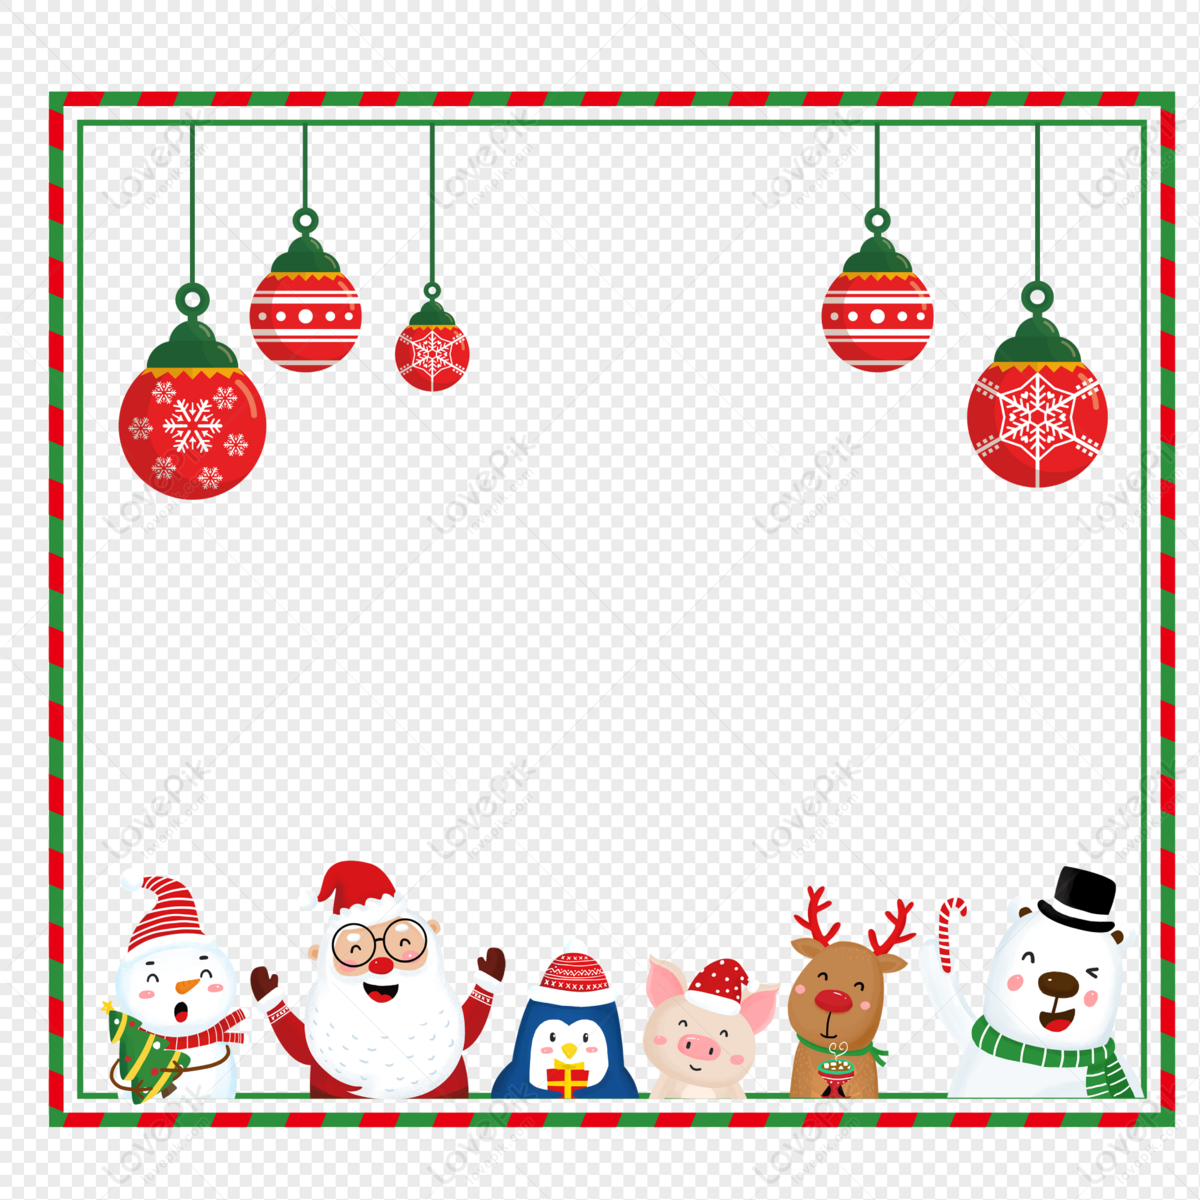 Christmas Border PNG White Transparent And Clipart Image For Free